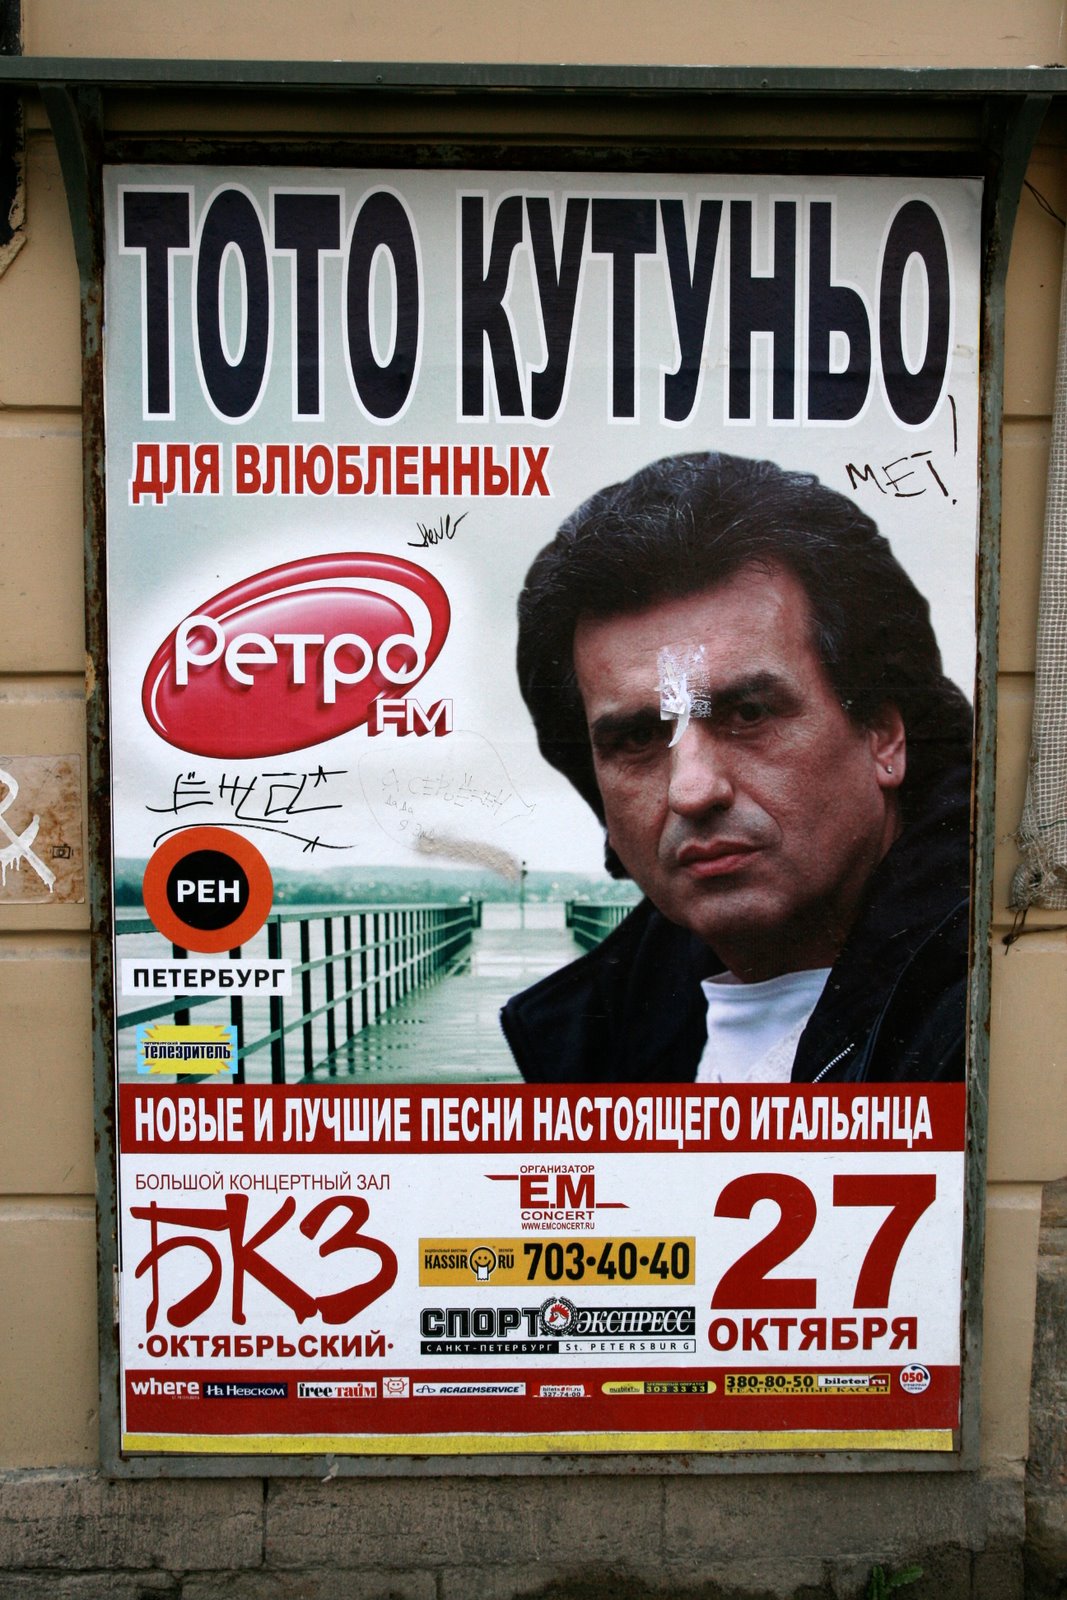 Toto Cotugno poster in St. Ptersburg, Russia